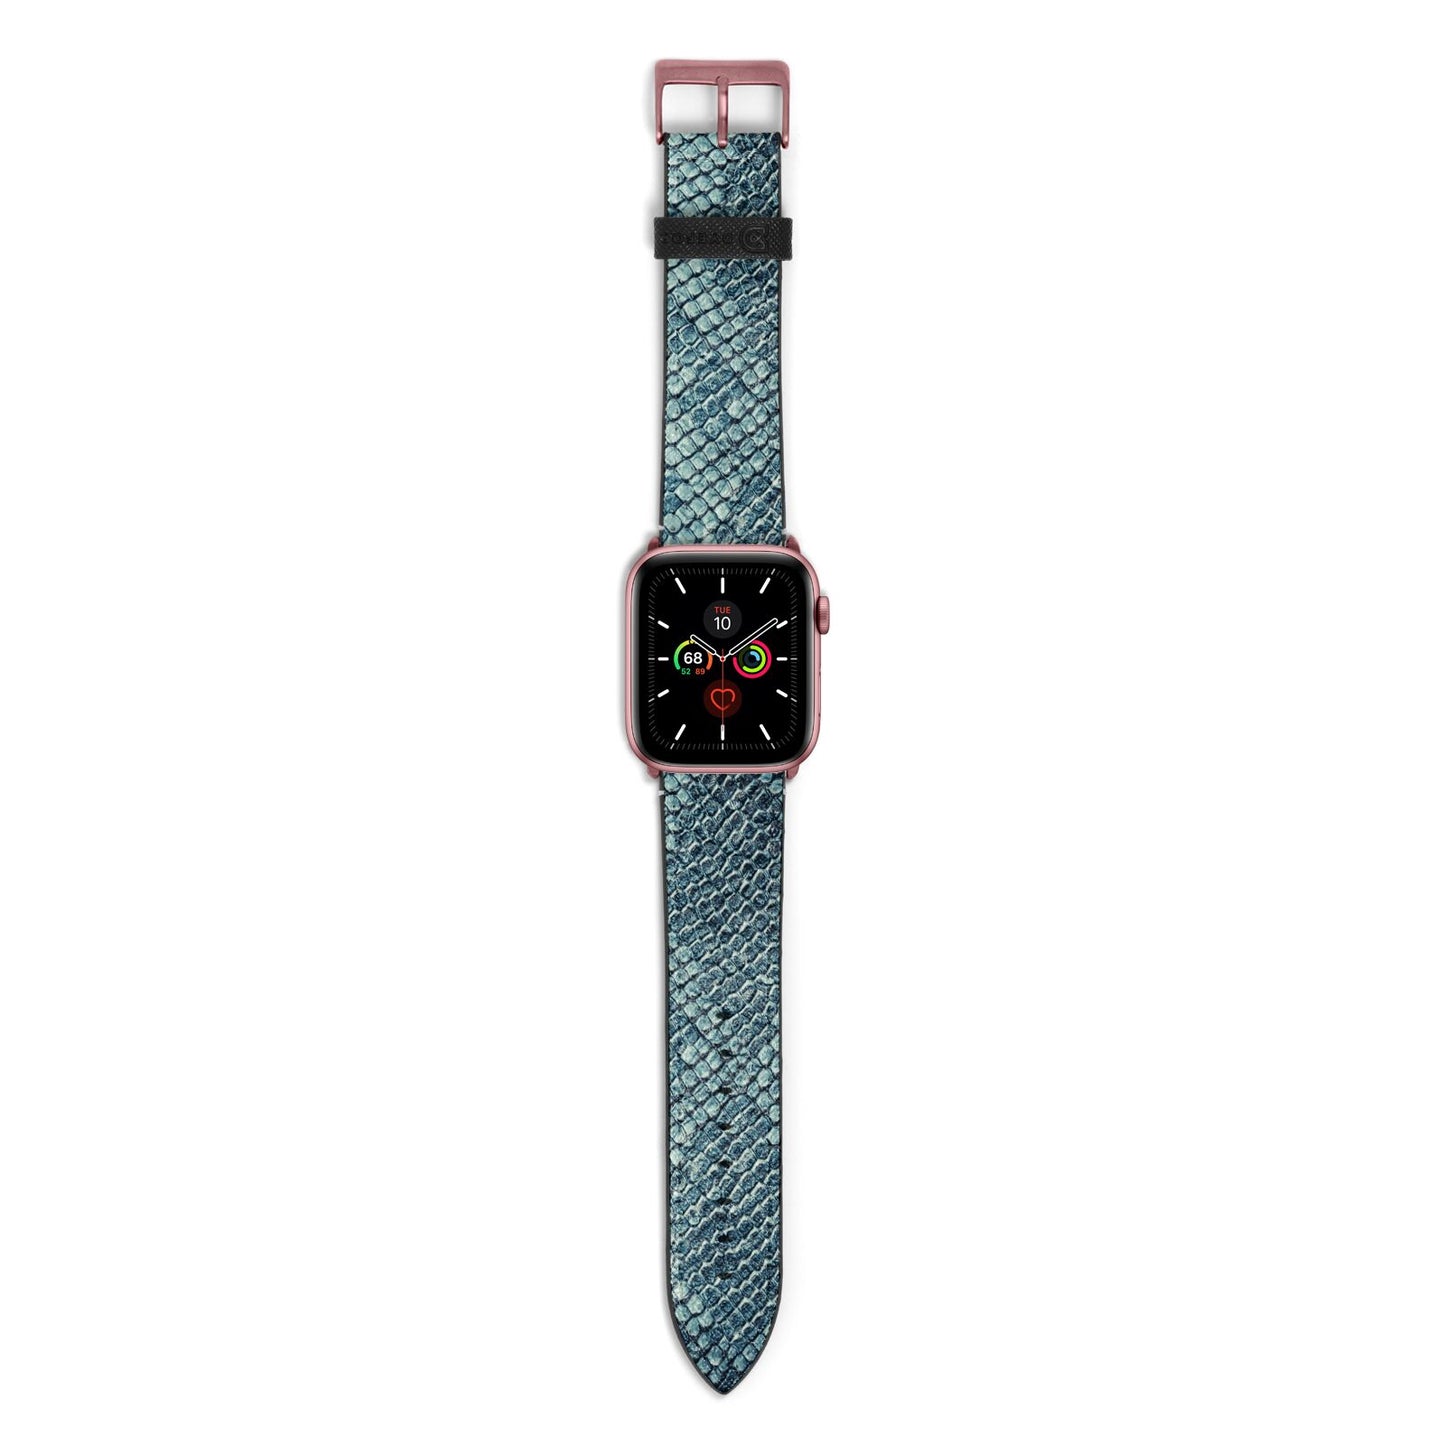 Teal Snakeskin Apple Watch Strap with Rose Gold Hardware